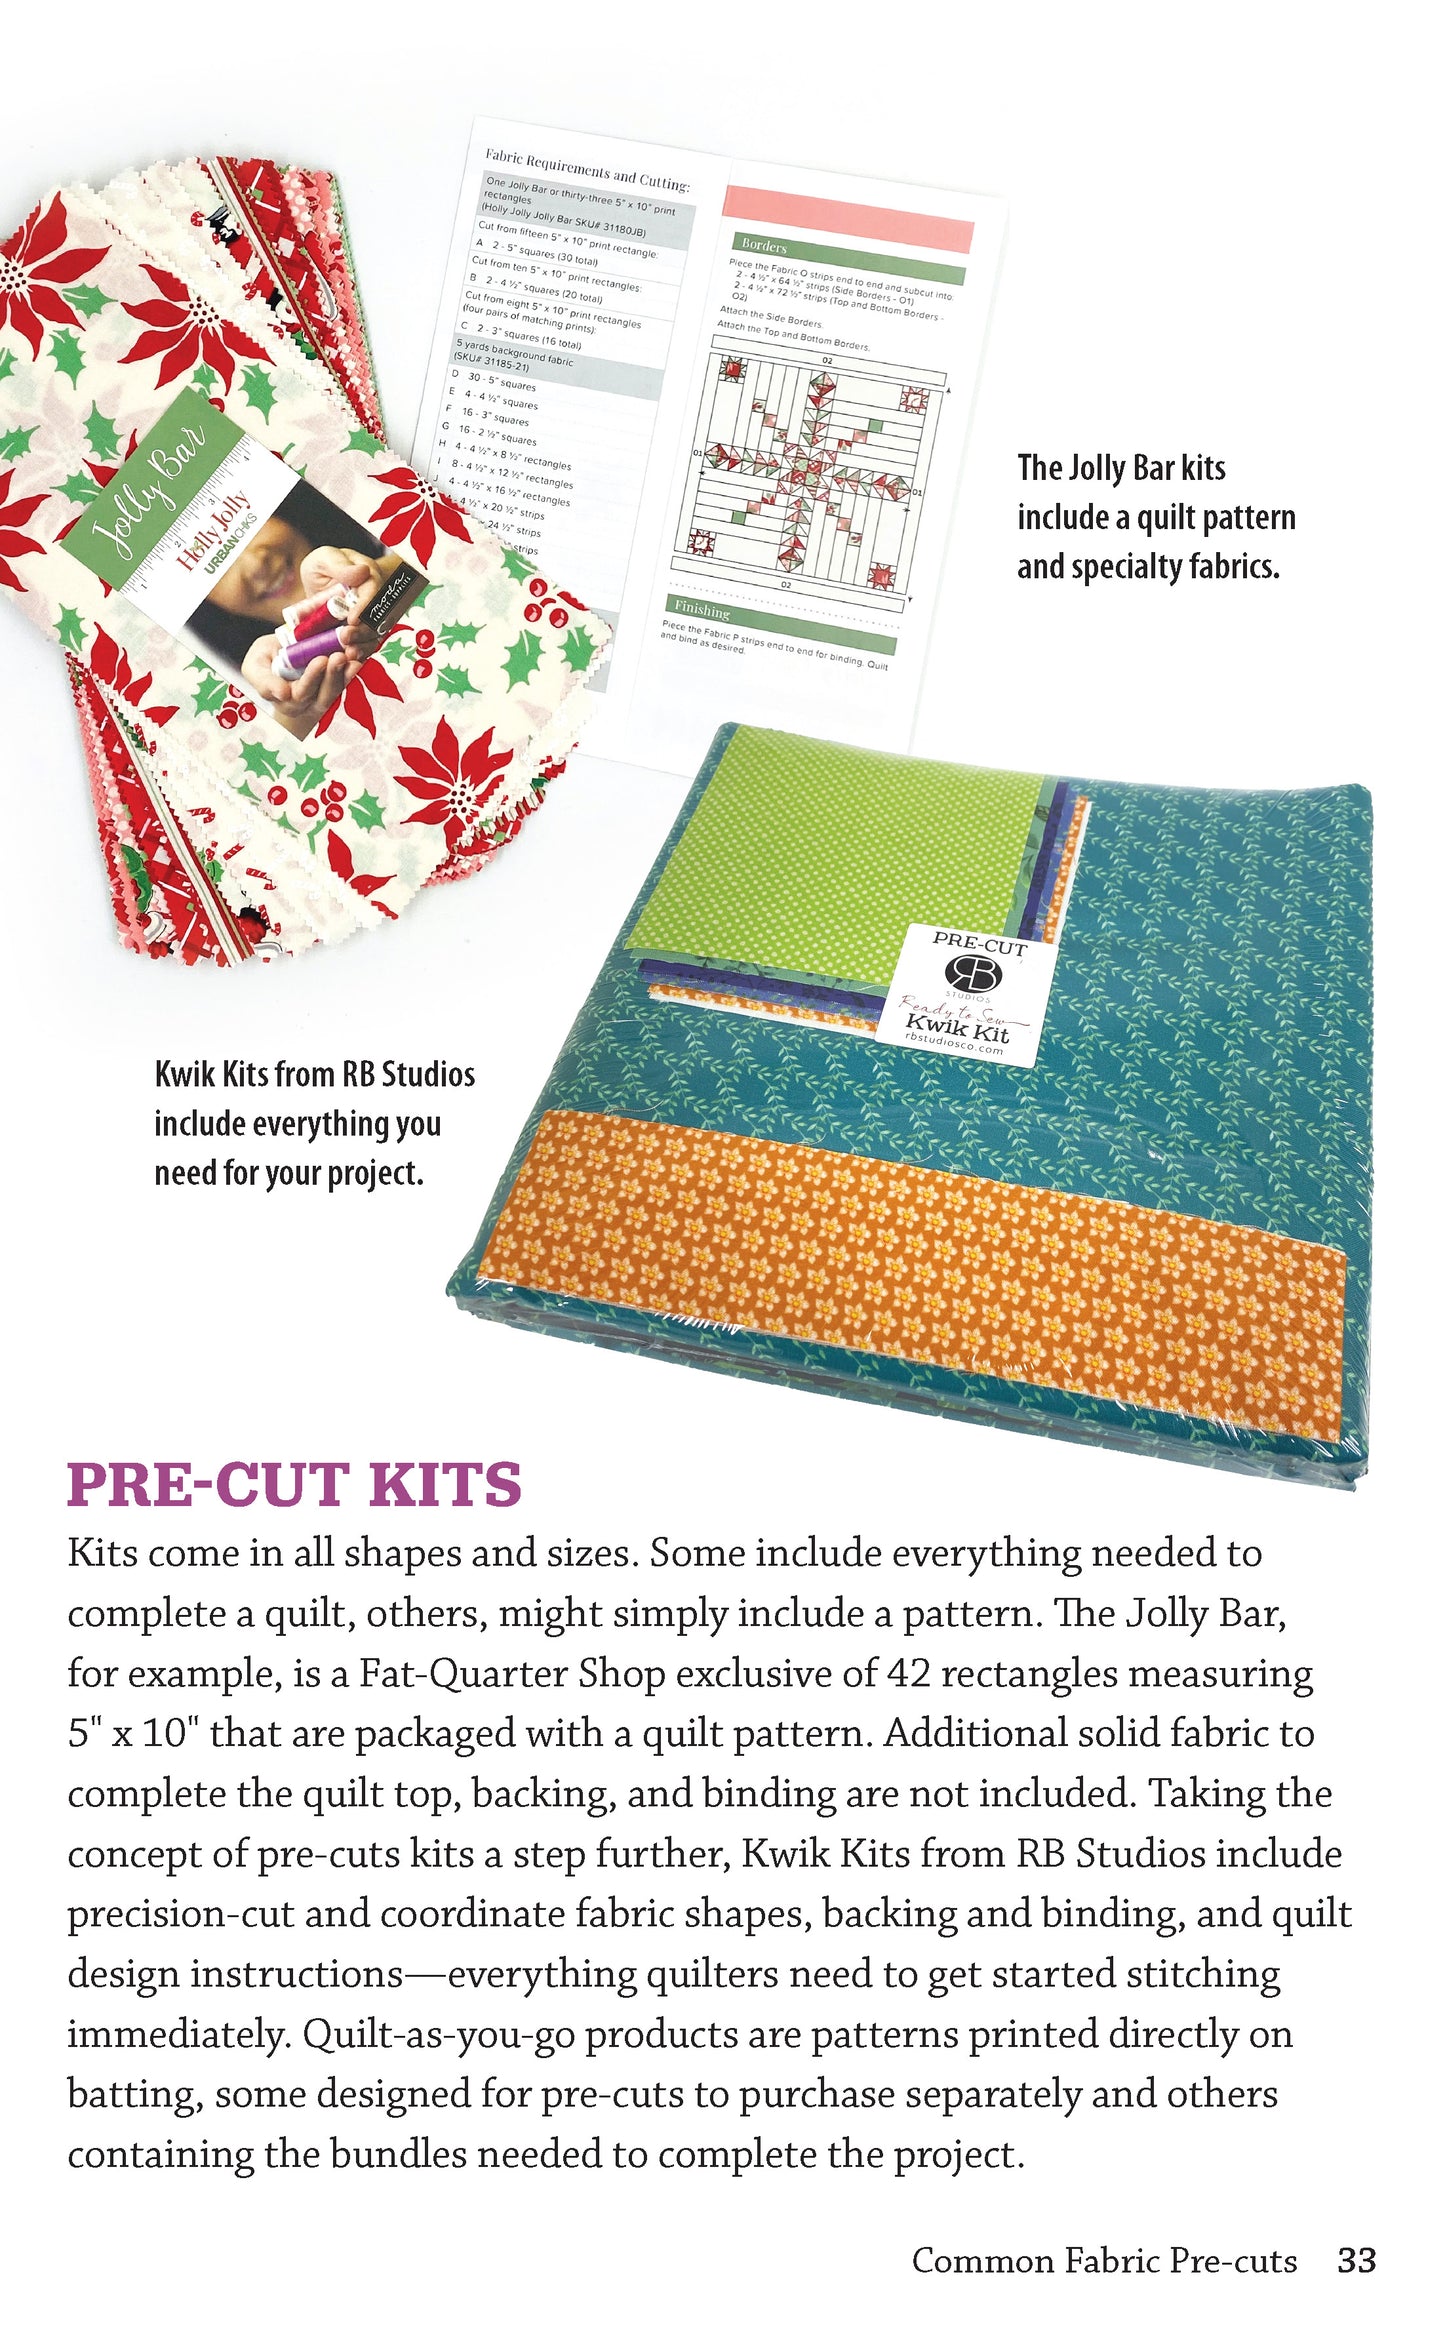 Pocket Guide to Fabric Pre-cuts